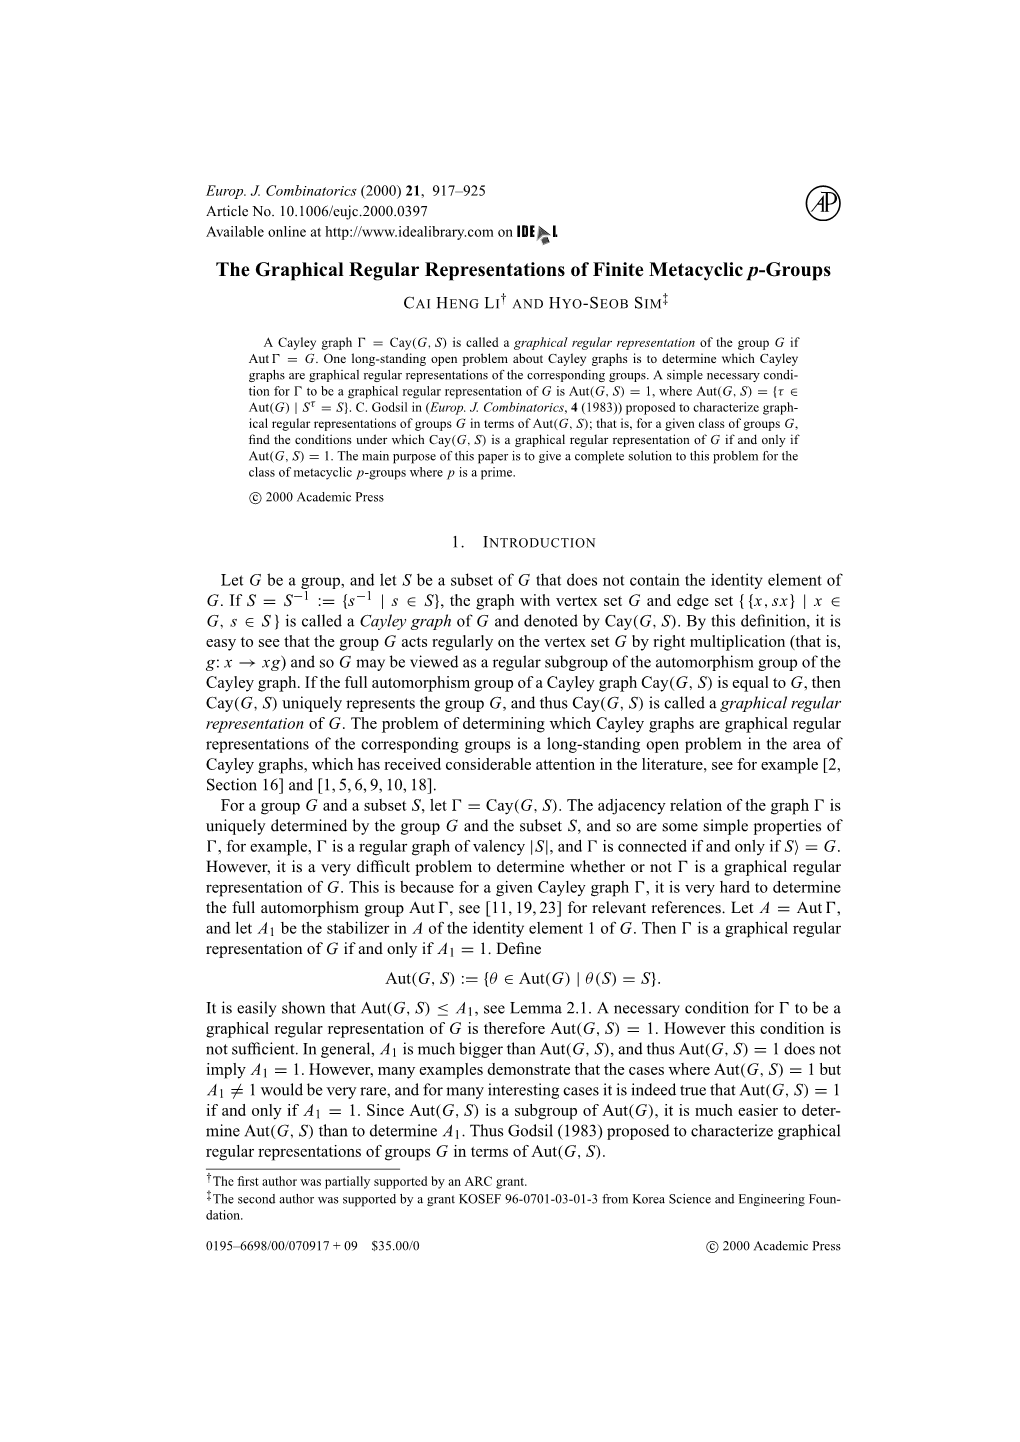 The Graphical Regular Representations of Finite Metacyclic P-Groups